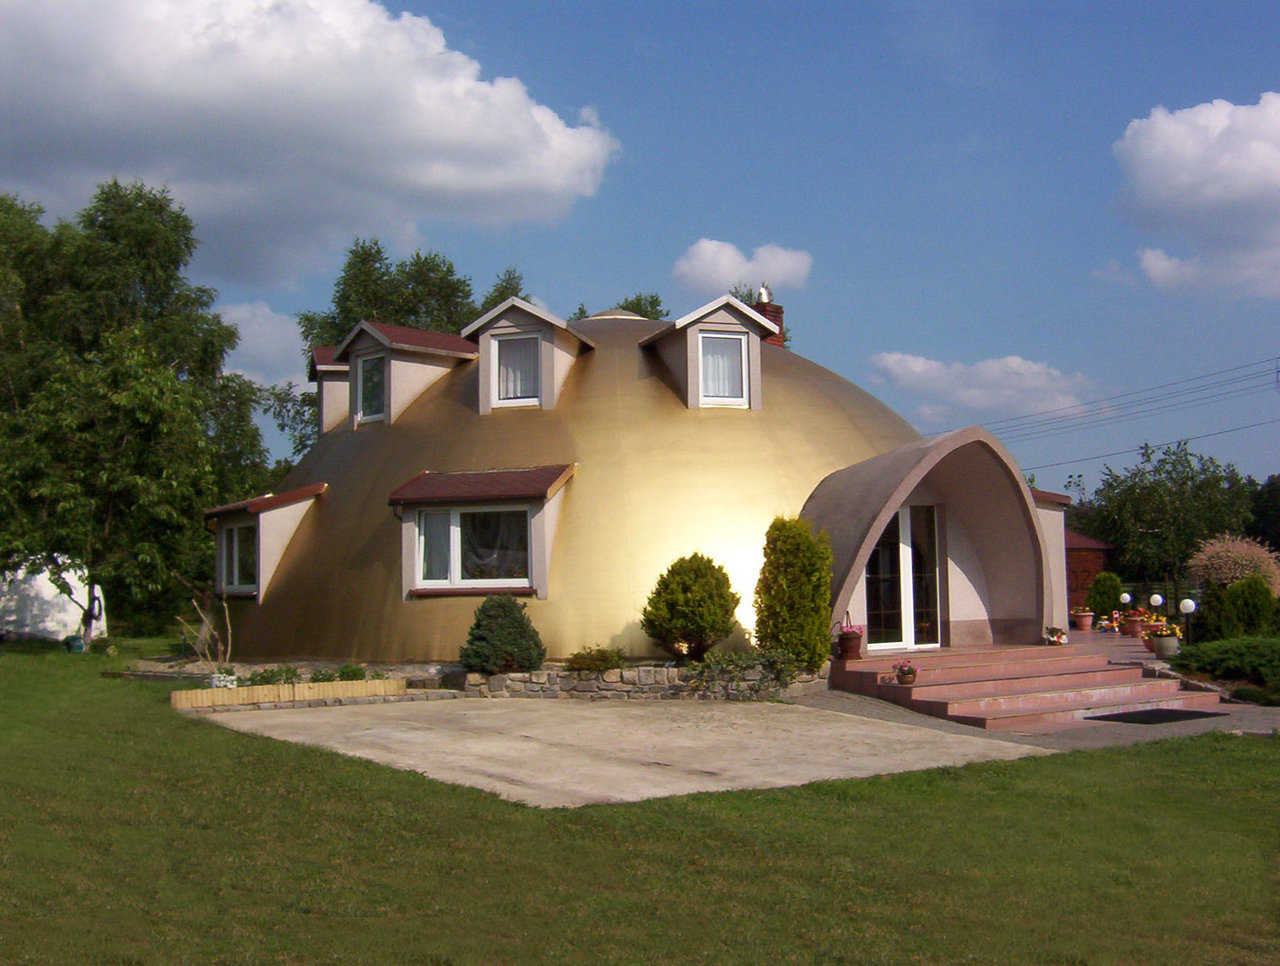 Pregowski Monolithic Dome Home — In 2000, Monolithic Construction of Poland built this two-story Monolithic Dome dream home that has a 50-foot diameter and a living area with 2500 square feet. In 2007, Jan cleaned the Airform and gave it a beautiful, new look with products available in Poland.